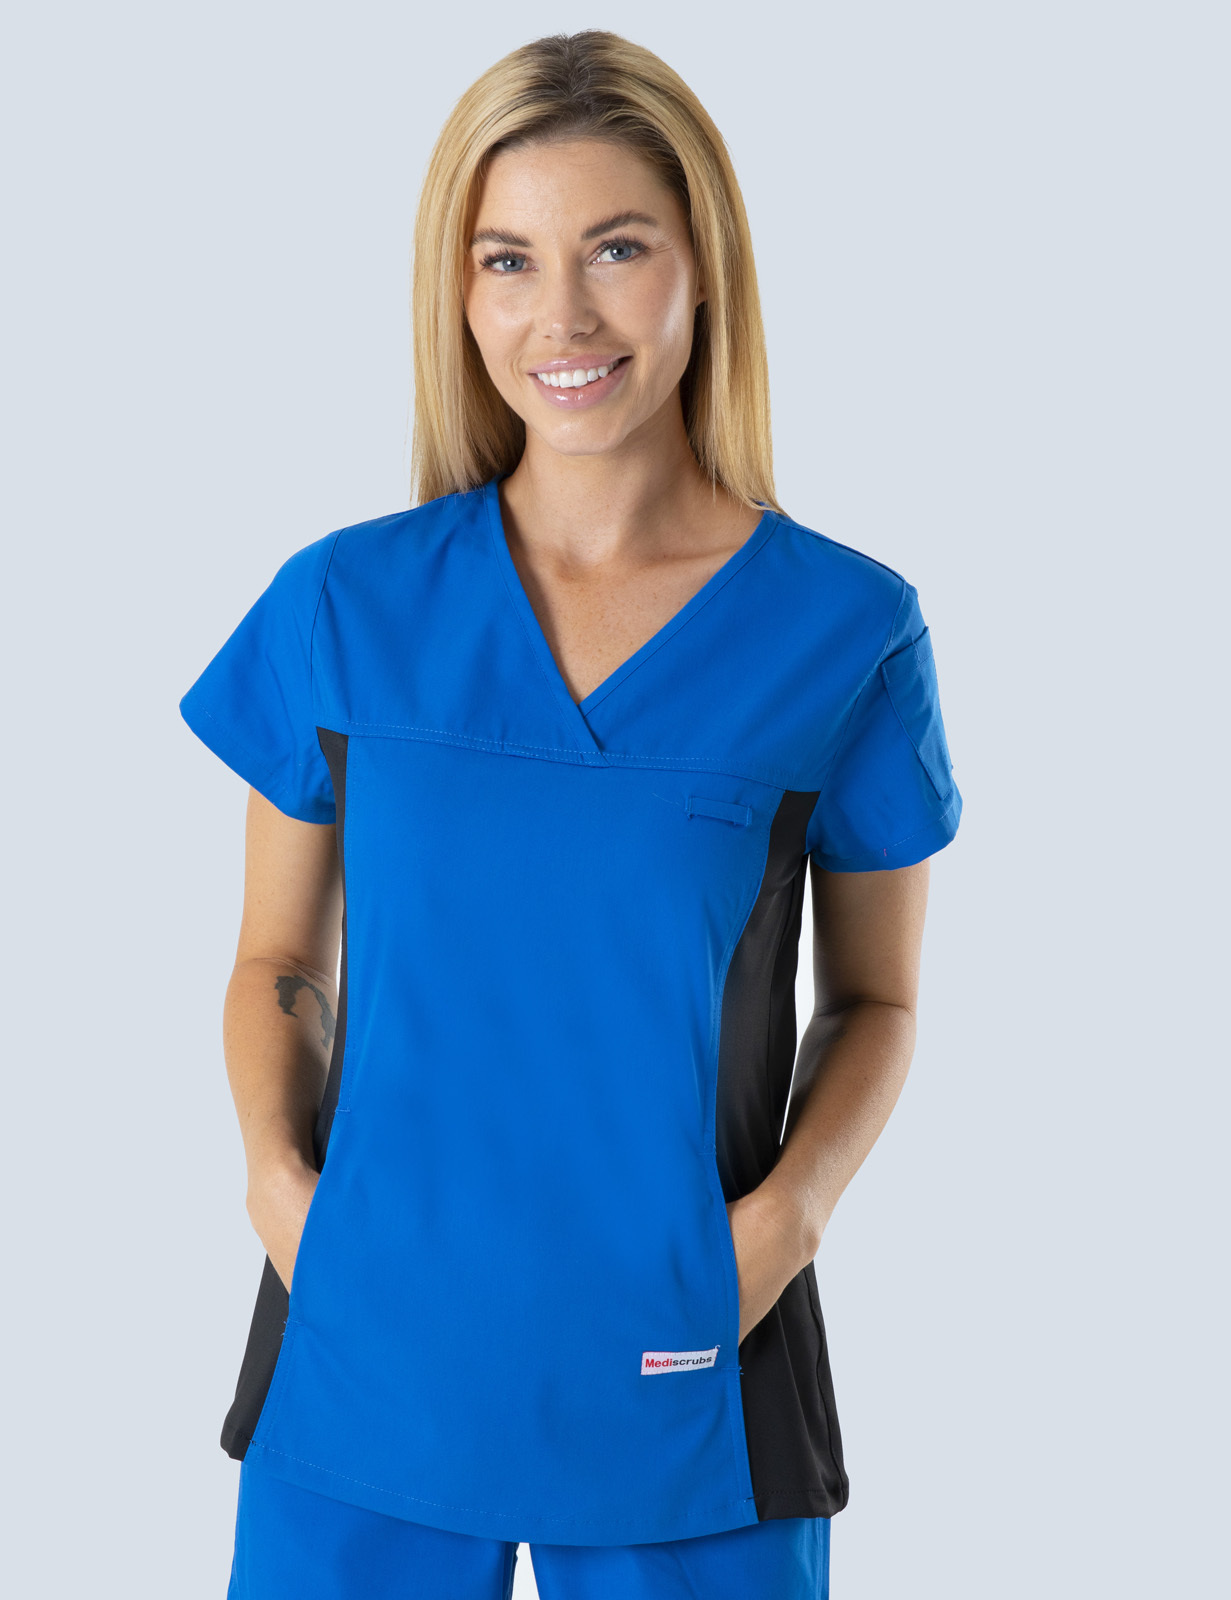 Women's Fit Solid Scrub Top With Spandex Panel - Royal - XX Small